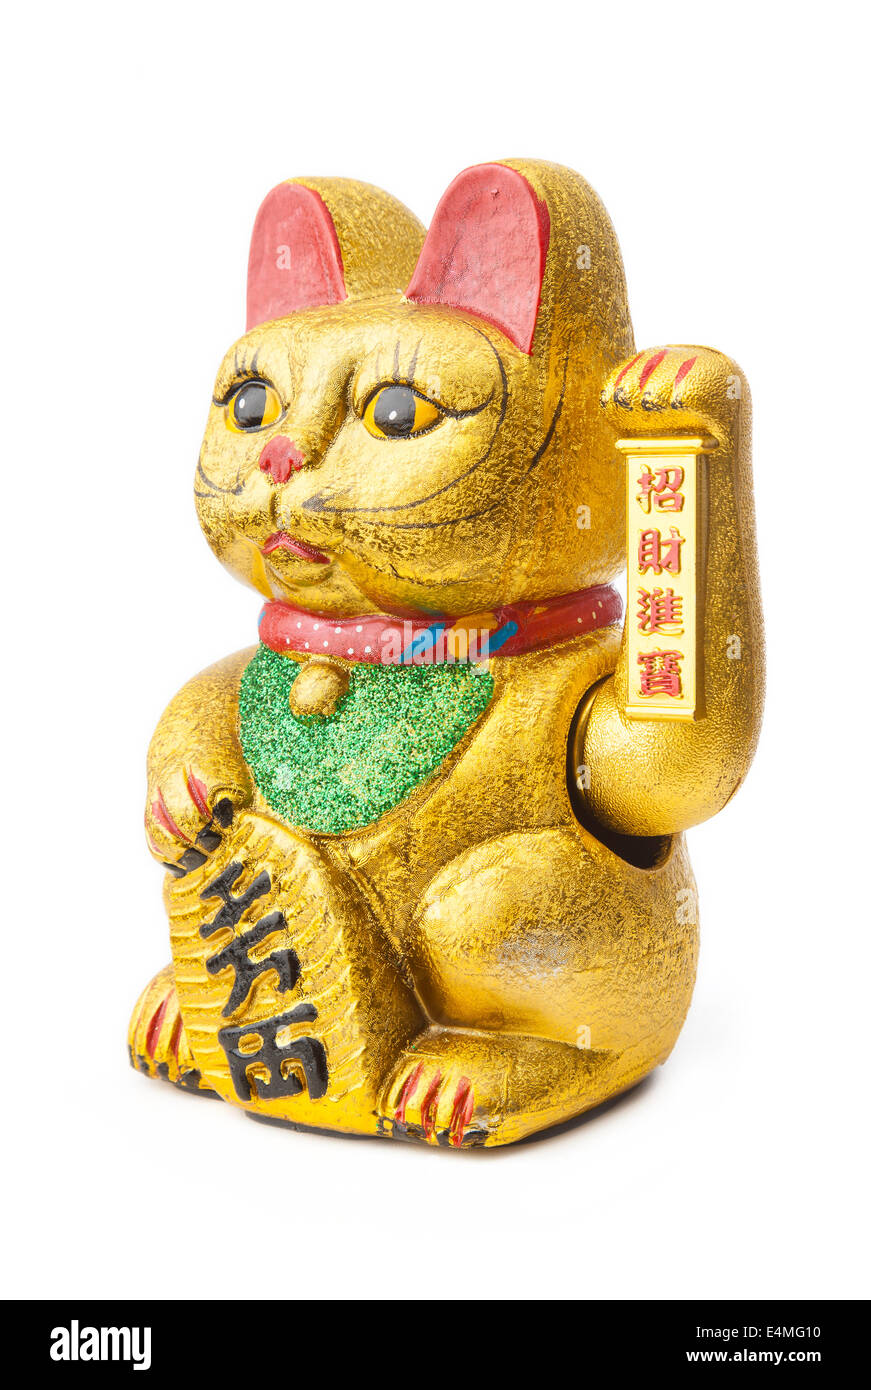 The Maneki Neki is an ancient cultural icon from japan and popular in many asian cultures. The welcoming cat supposedly brings g Stock Photo